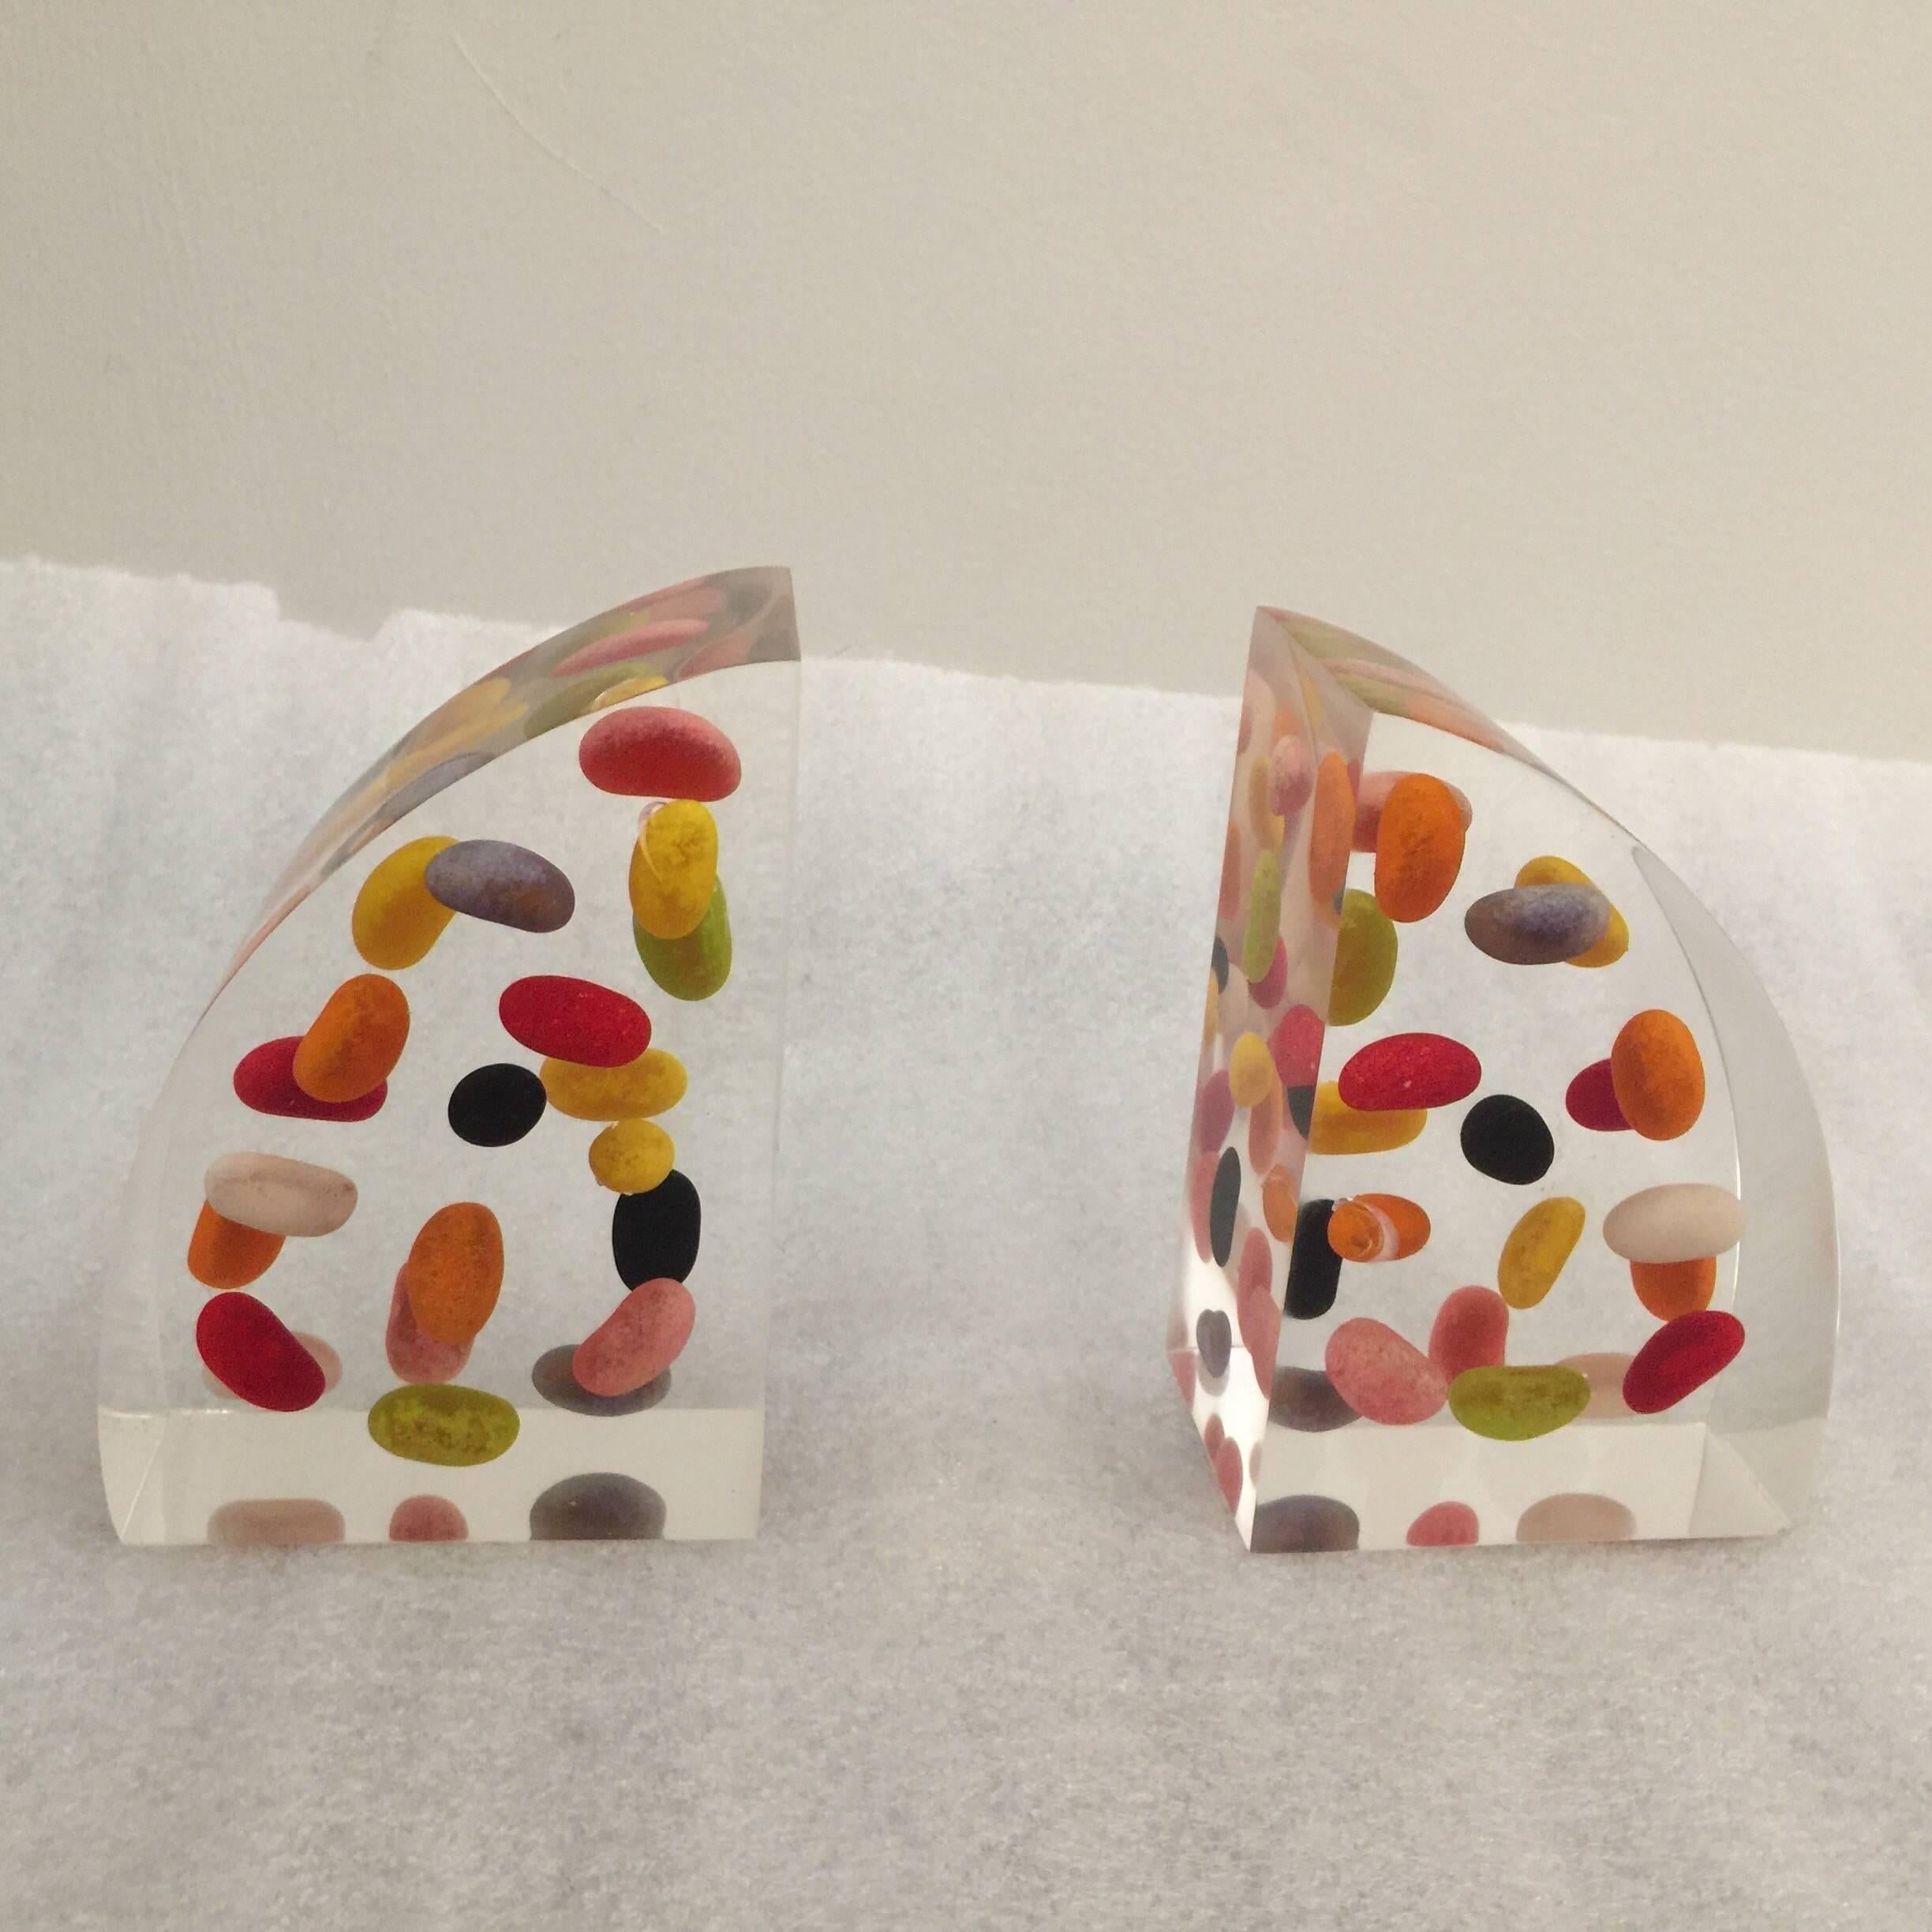 American Vintage Lucite Jellybean Bookends